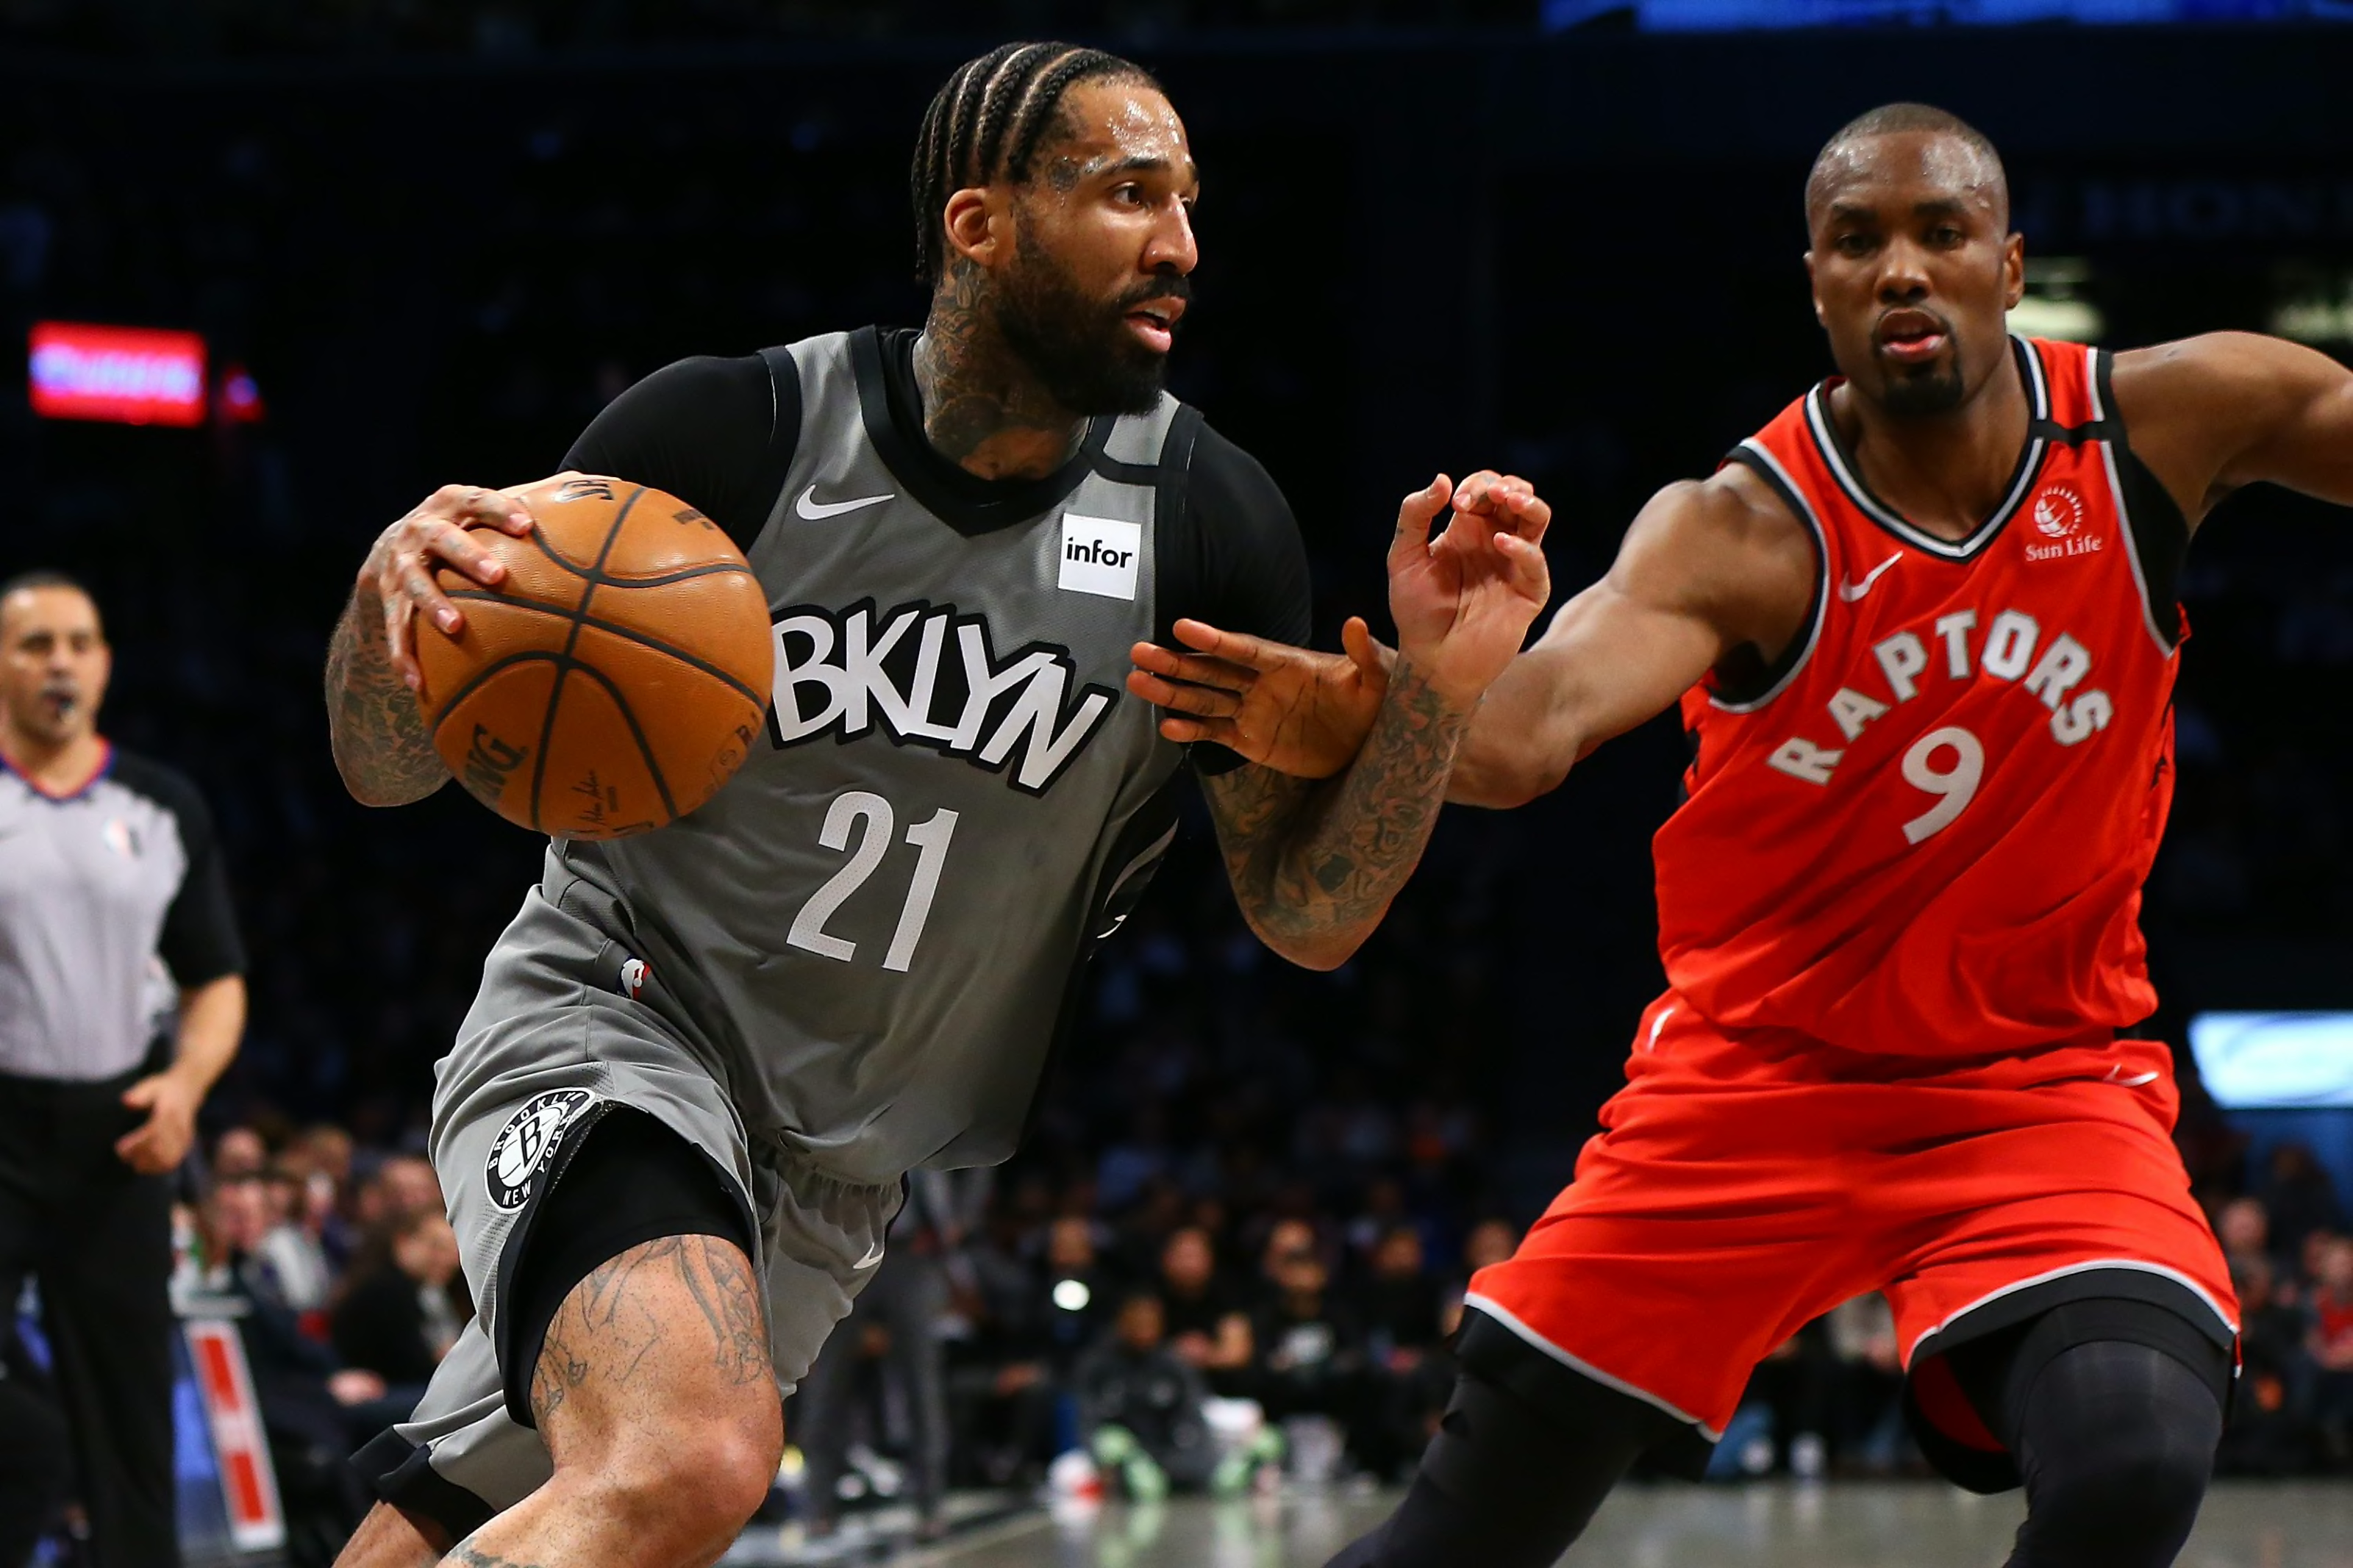 Toronto Raptors Playoff Preview Breaking down matchup vs. Nets